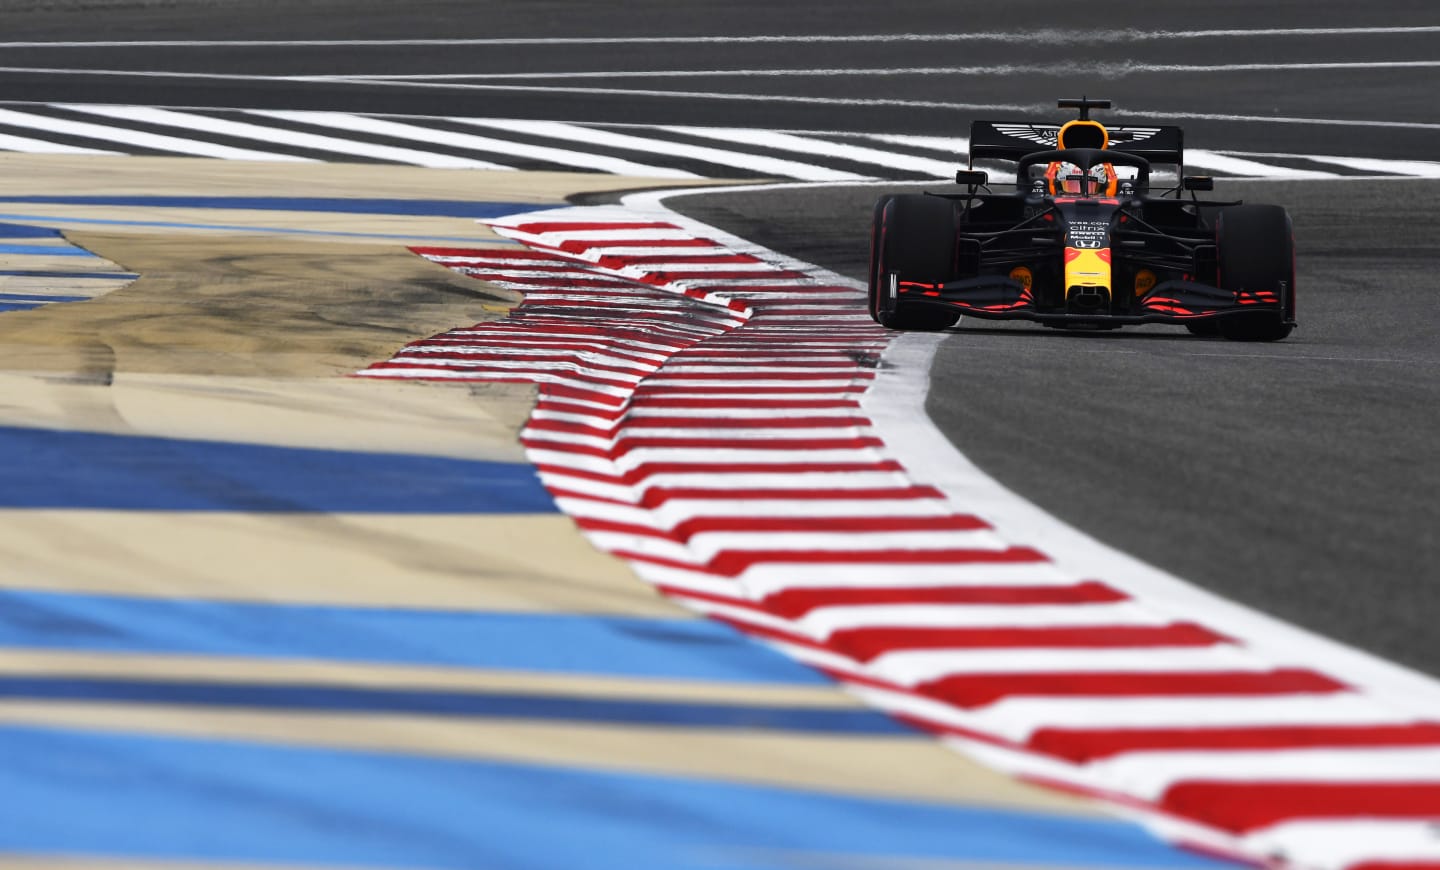 BAHRAIN, BAHRAIN - NOVEMBER 28: Max Verstappen of the Netherlands driving the (33) Aston Martin Red Bull Racing RB16 on track during final practice ahead of the F1 Grand Prix of Bahrain at Bahrain International Circuit on November 28, 2020 in Bahrain, Bahrain. (Photo by Rudy Carezzevoli/Getty Images)